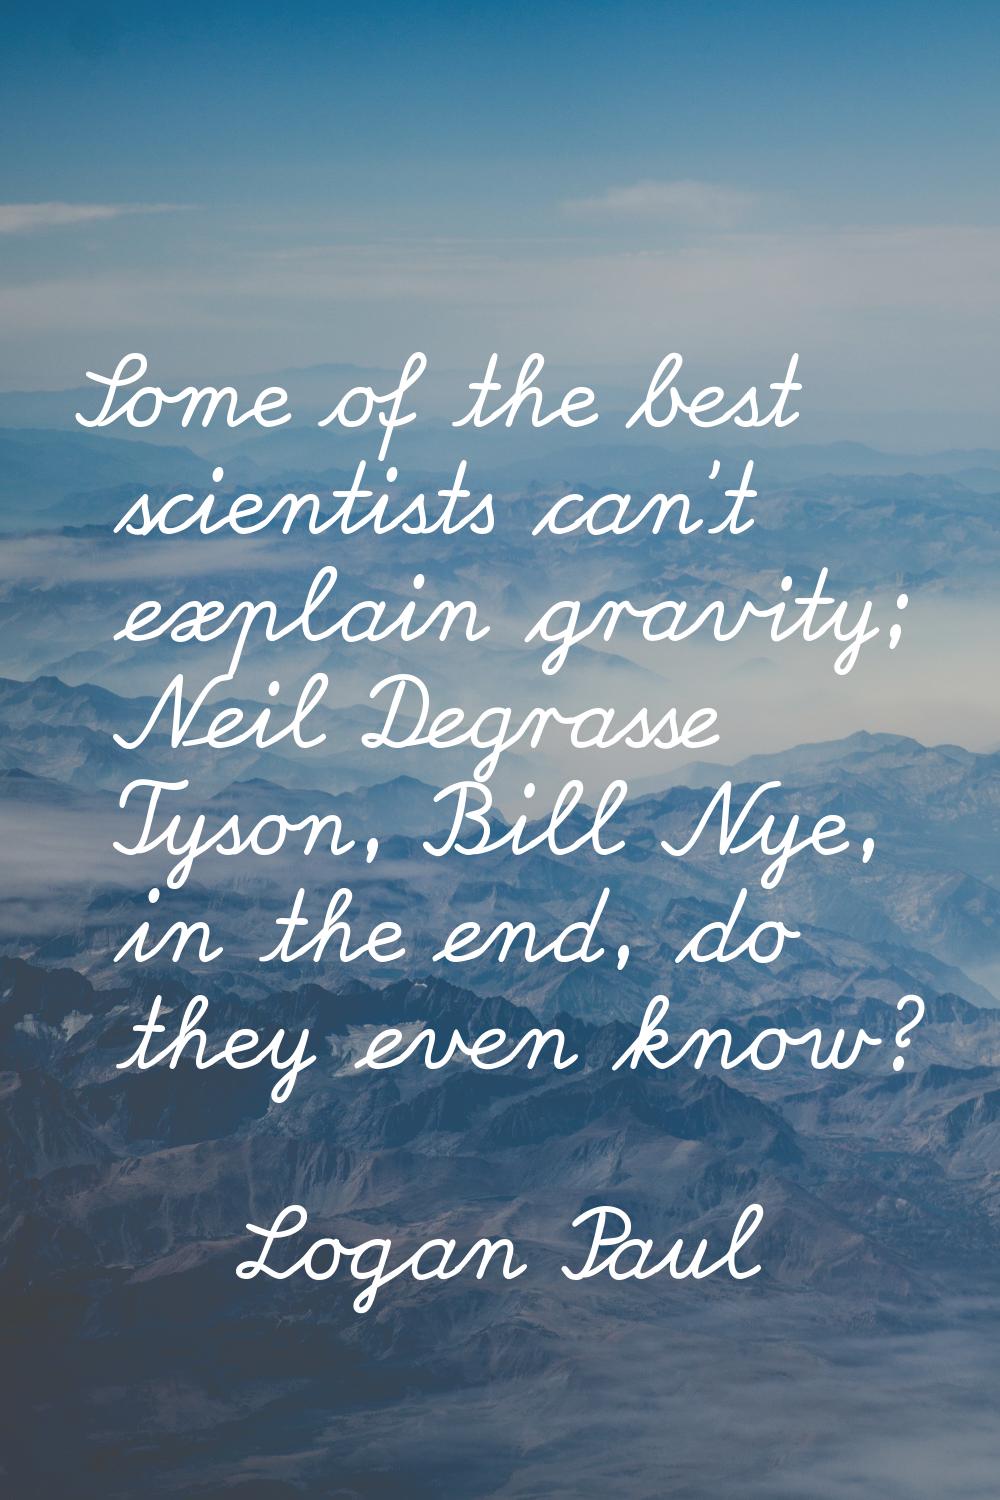 Some of the best scientists can't explain gravity; Neil Degrasse Tyson, Bill Nye, in the end, do th